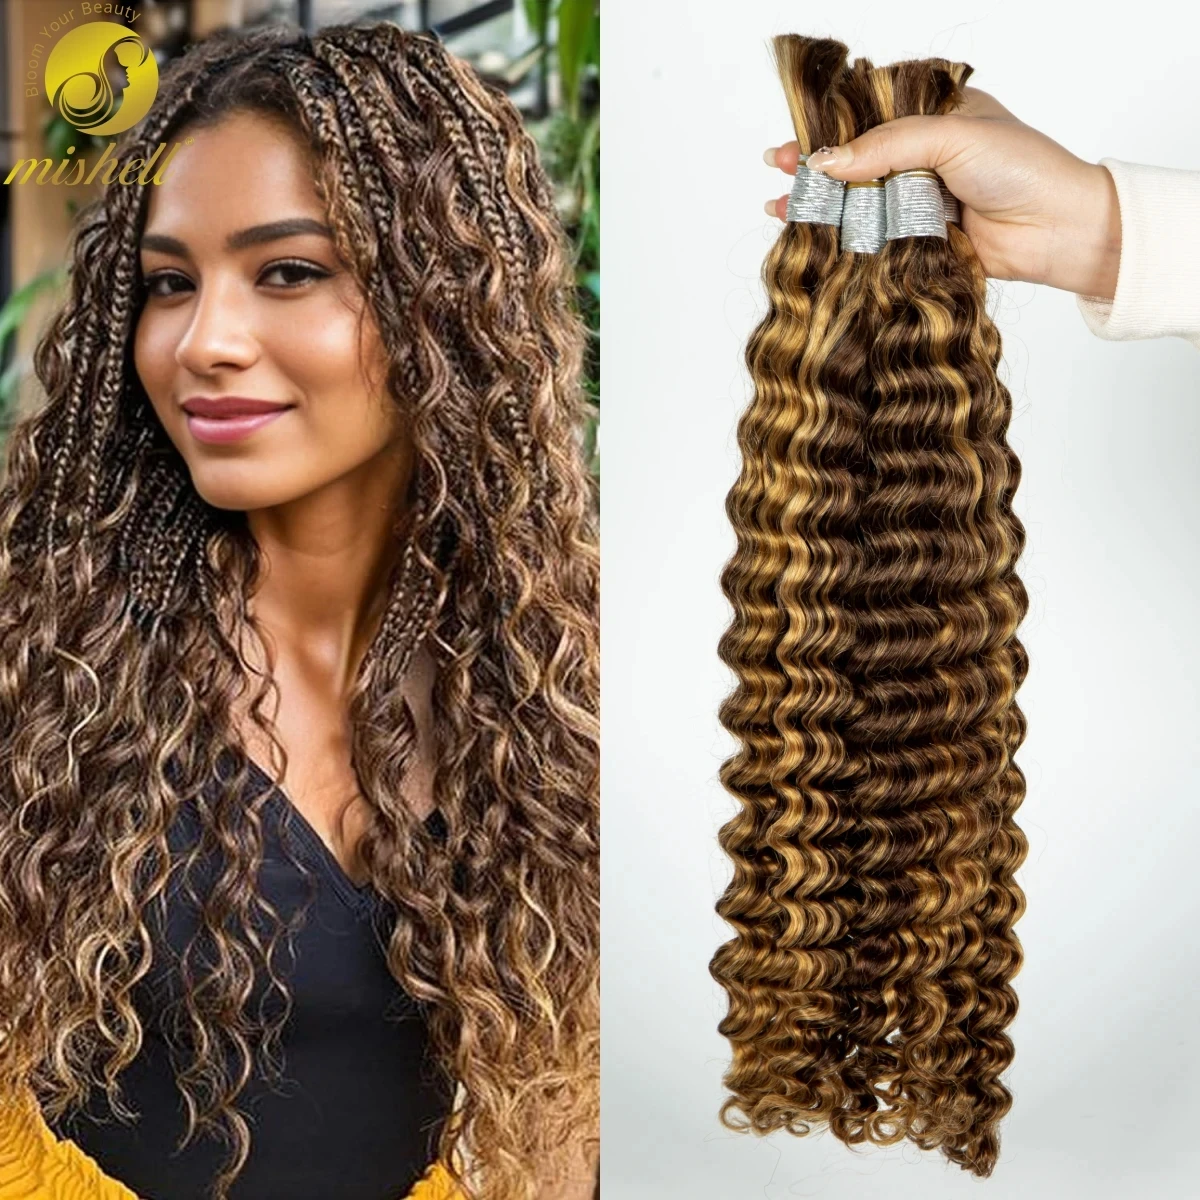 

26 28 Inches Deep Wave Highlight Ombre Bulk Human Hair For Braiding No Weft 100% Virgin Hair Curly Extensions For Boho Braids